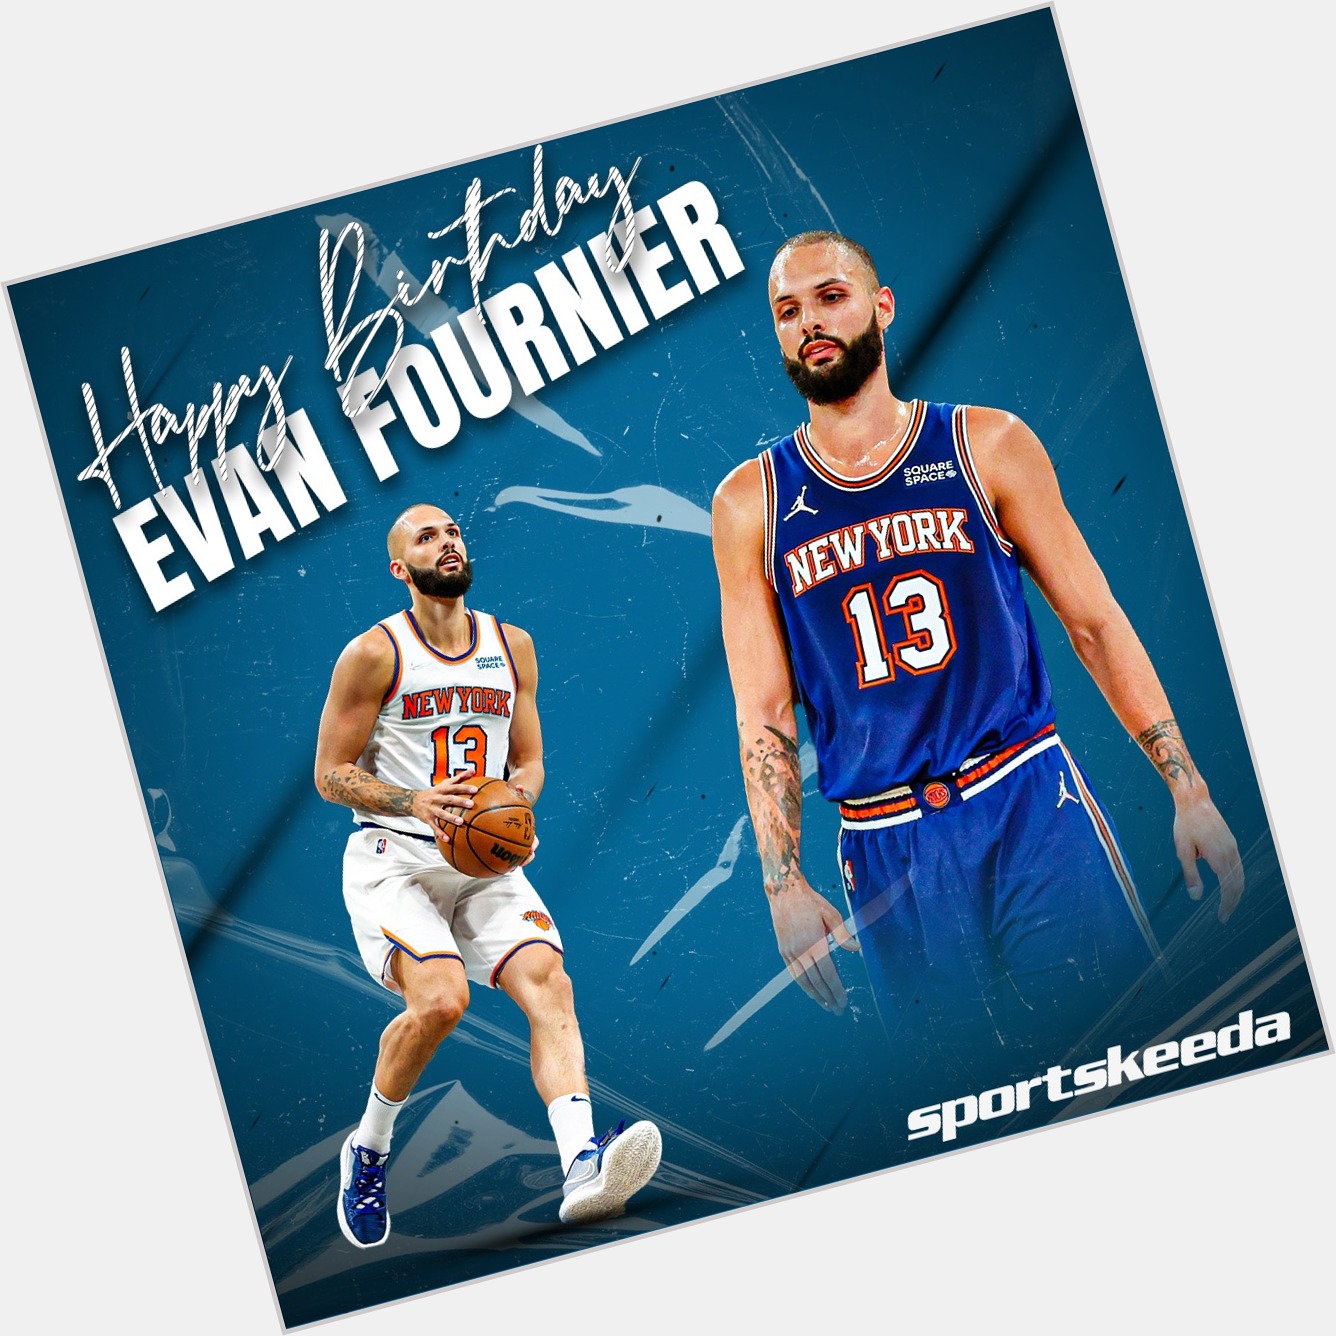 Join us in wishing a Happy 30th Birthday to Evan Fournier! 